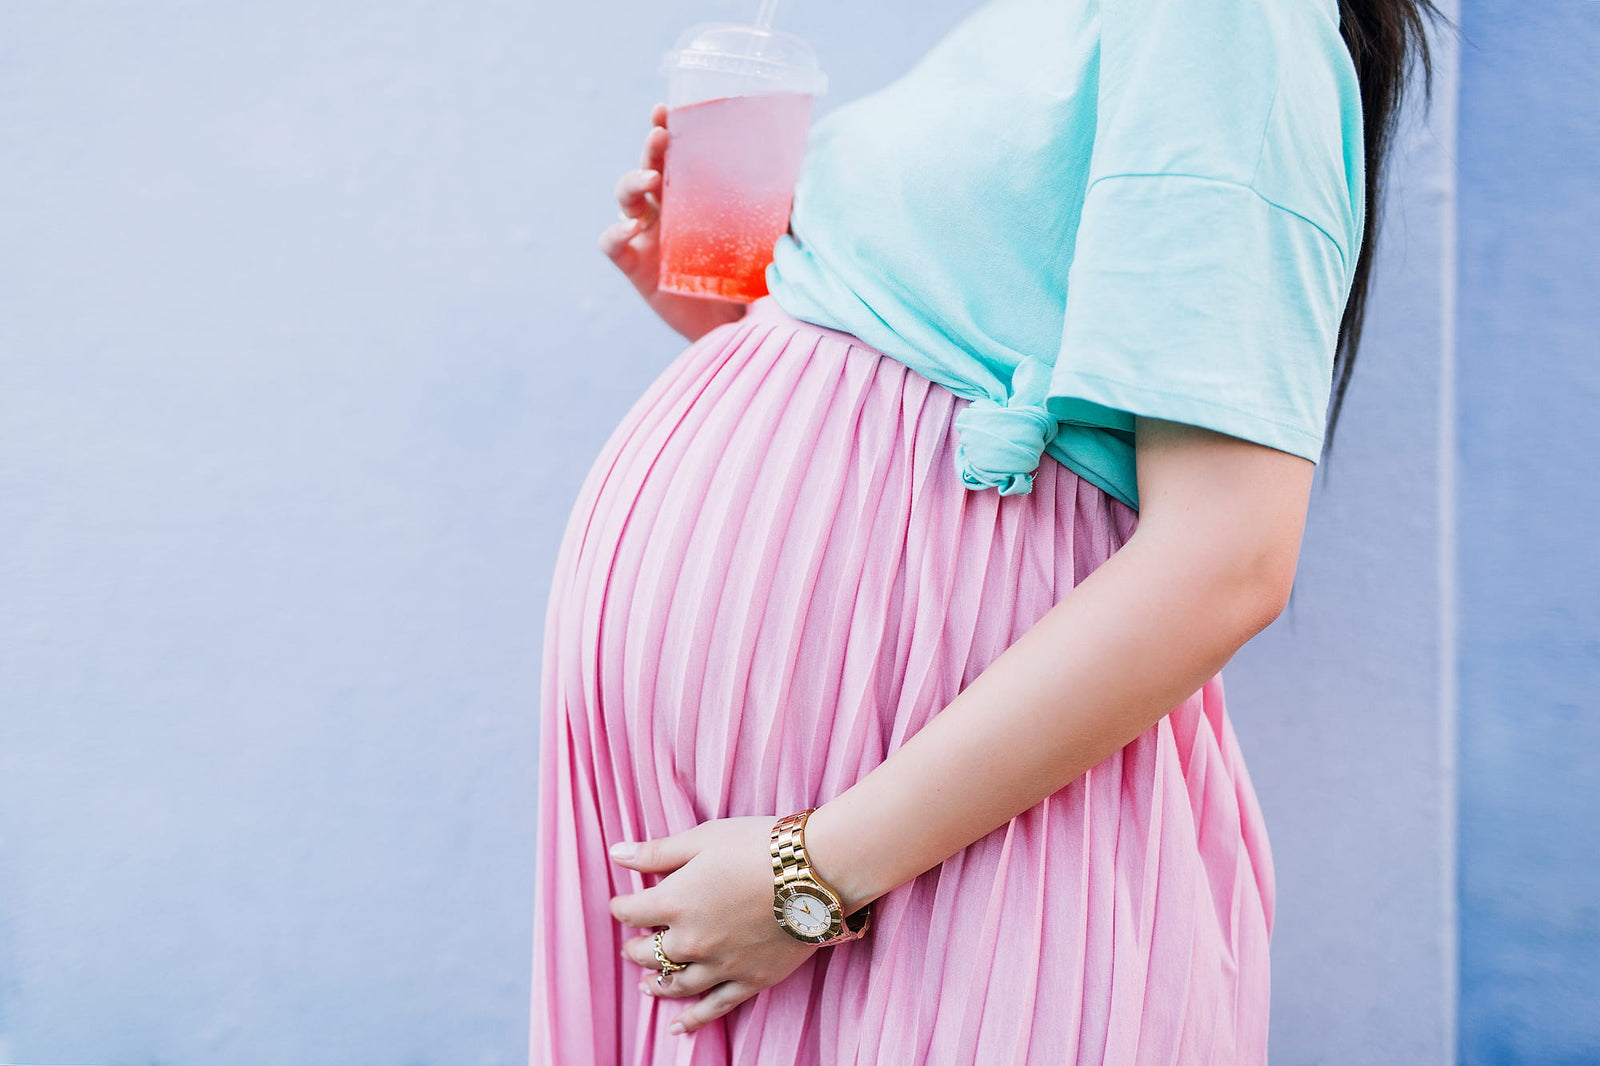 Non-caffeinated Starbucks Drinks are a great option for pregnant women.